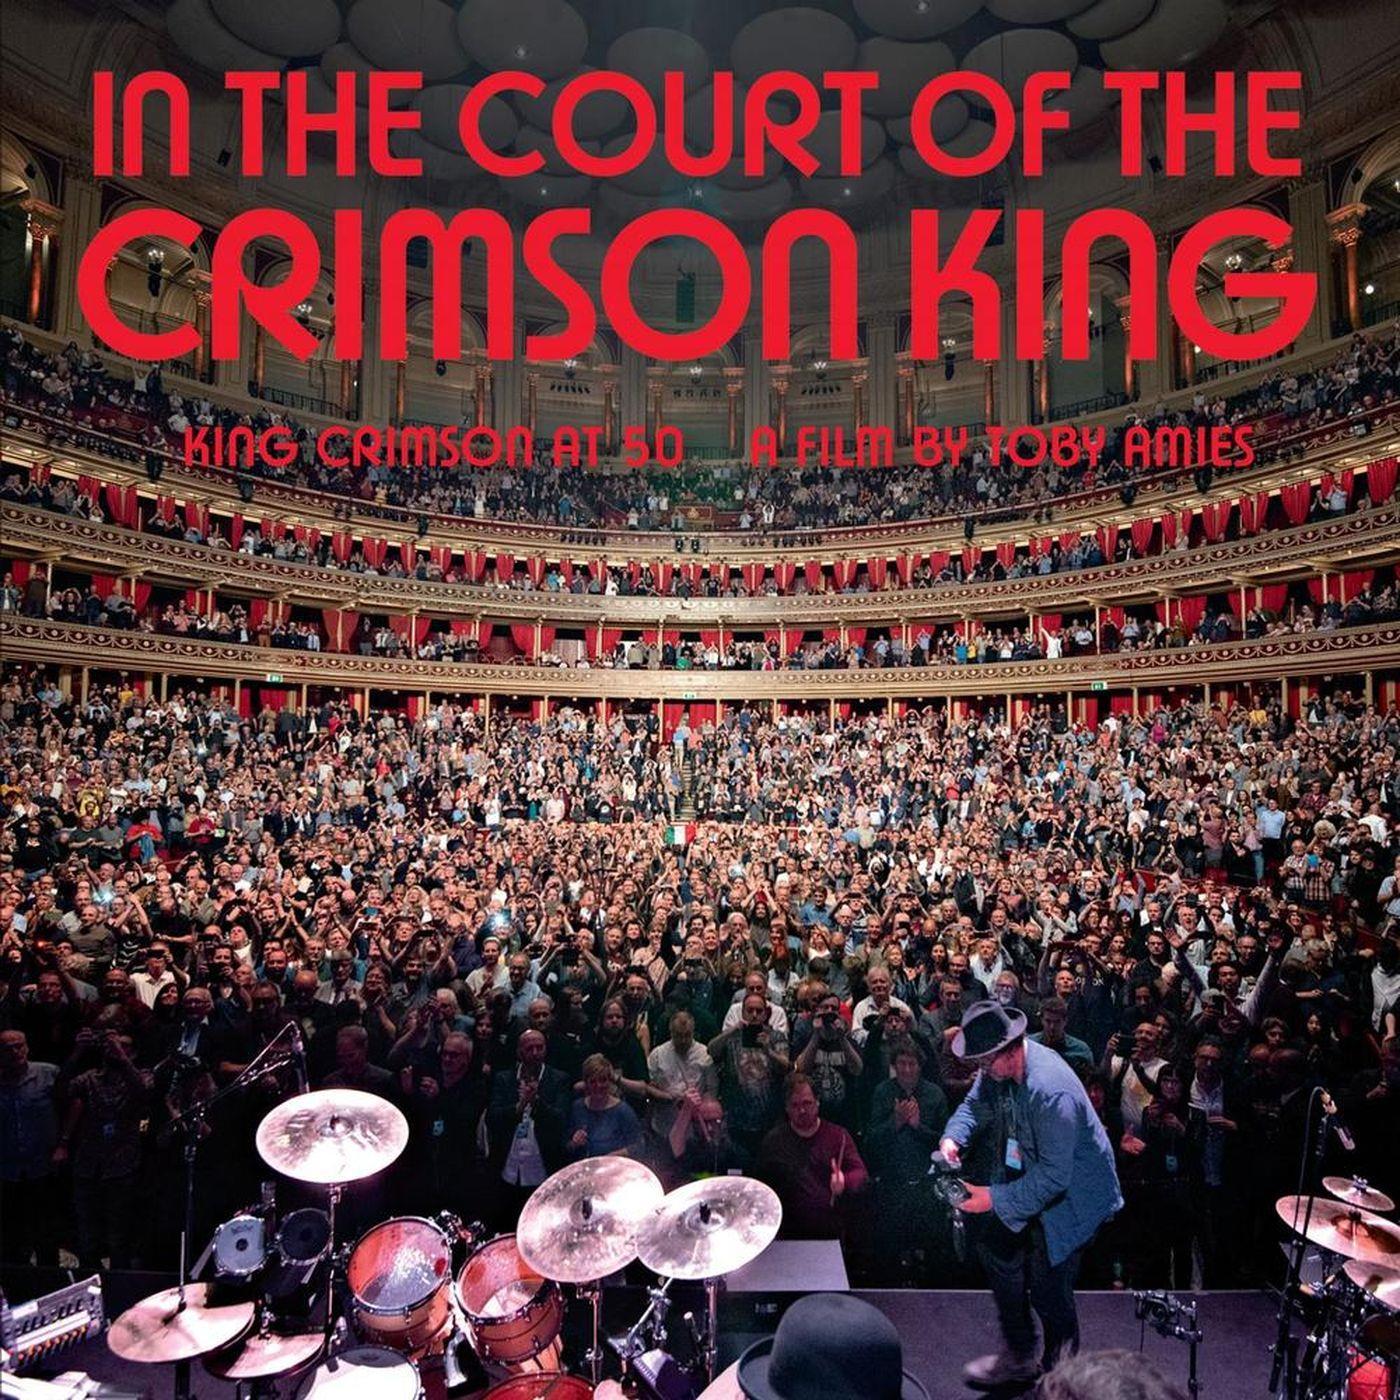 in the court of the crimson king: king crimson at 50 - a film by toby amies (visual pack) (import)